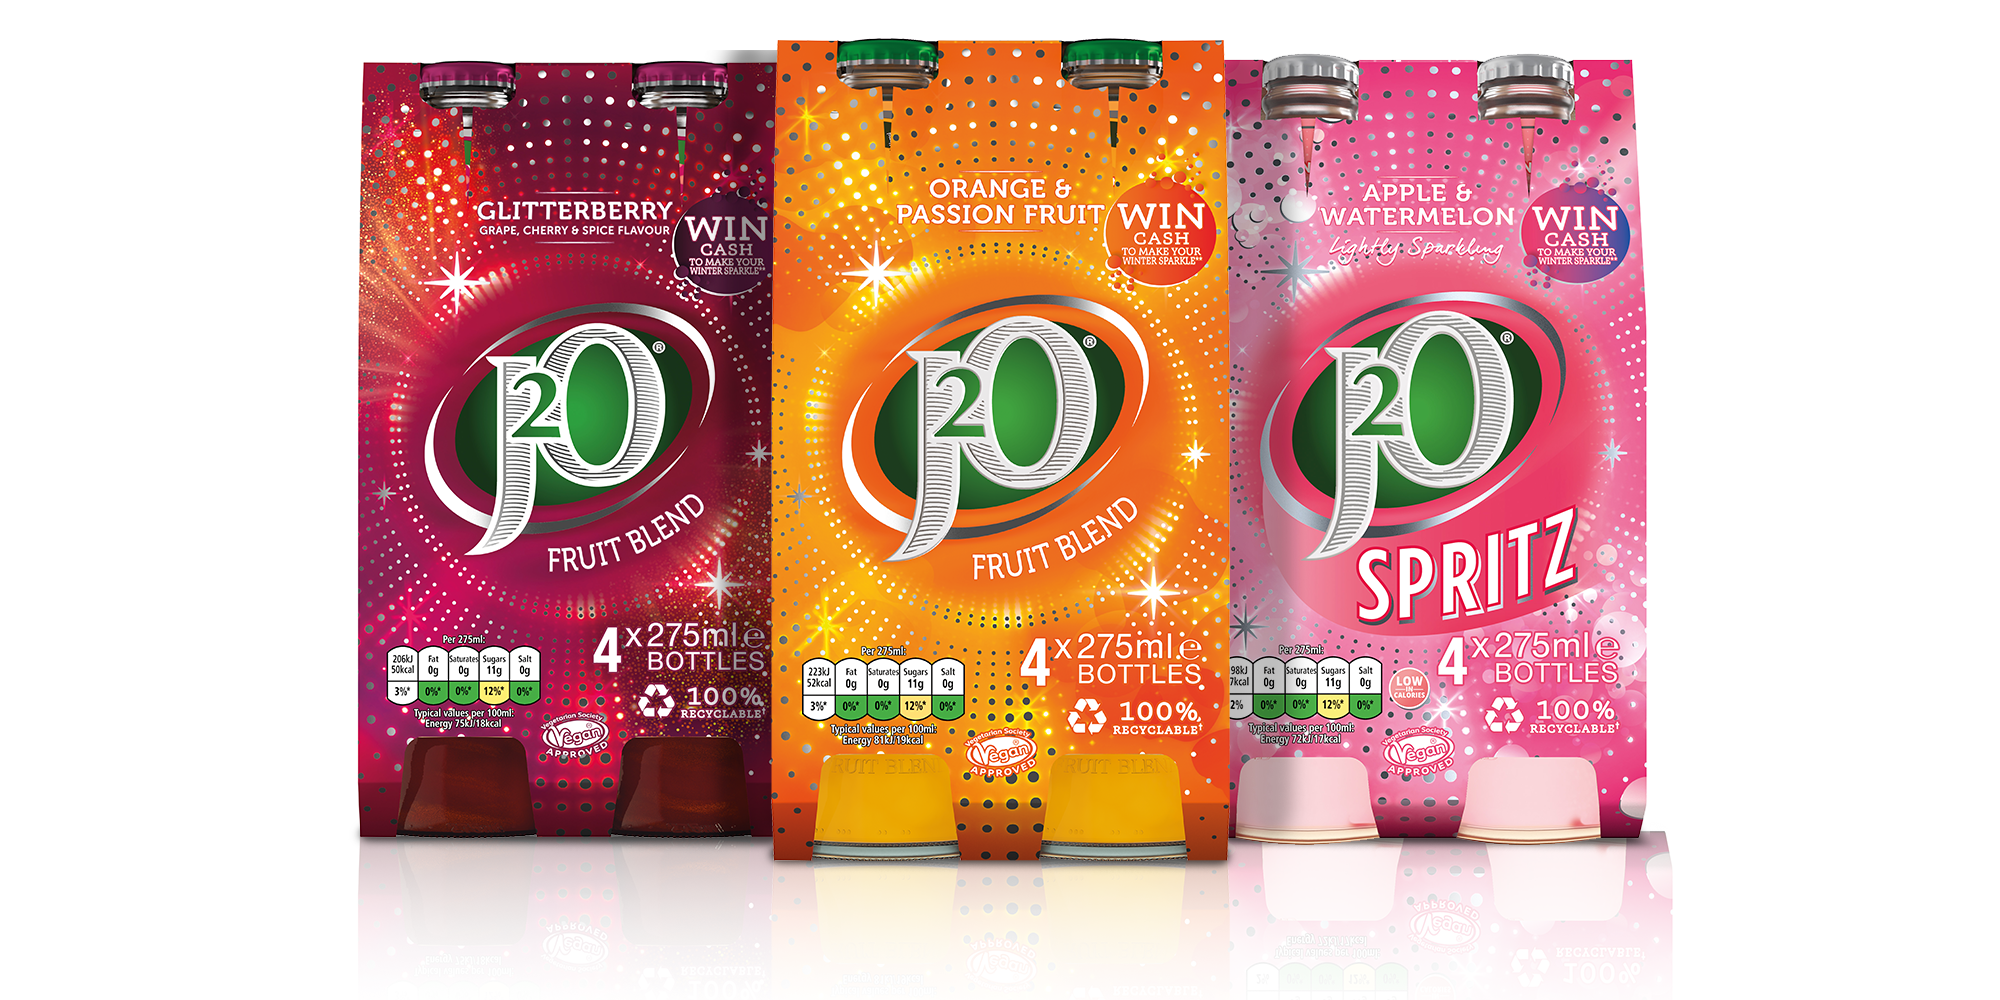 J2O promotion adds Christmas sparkle to soft drinks